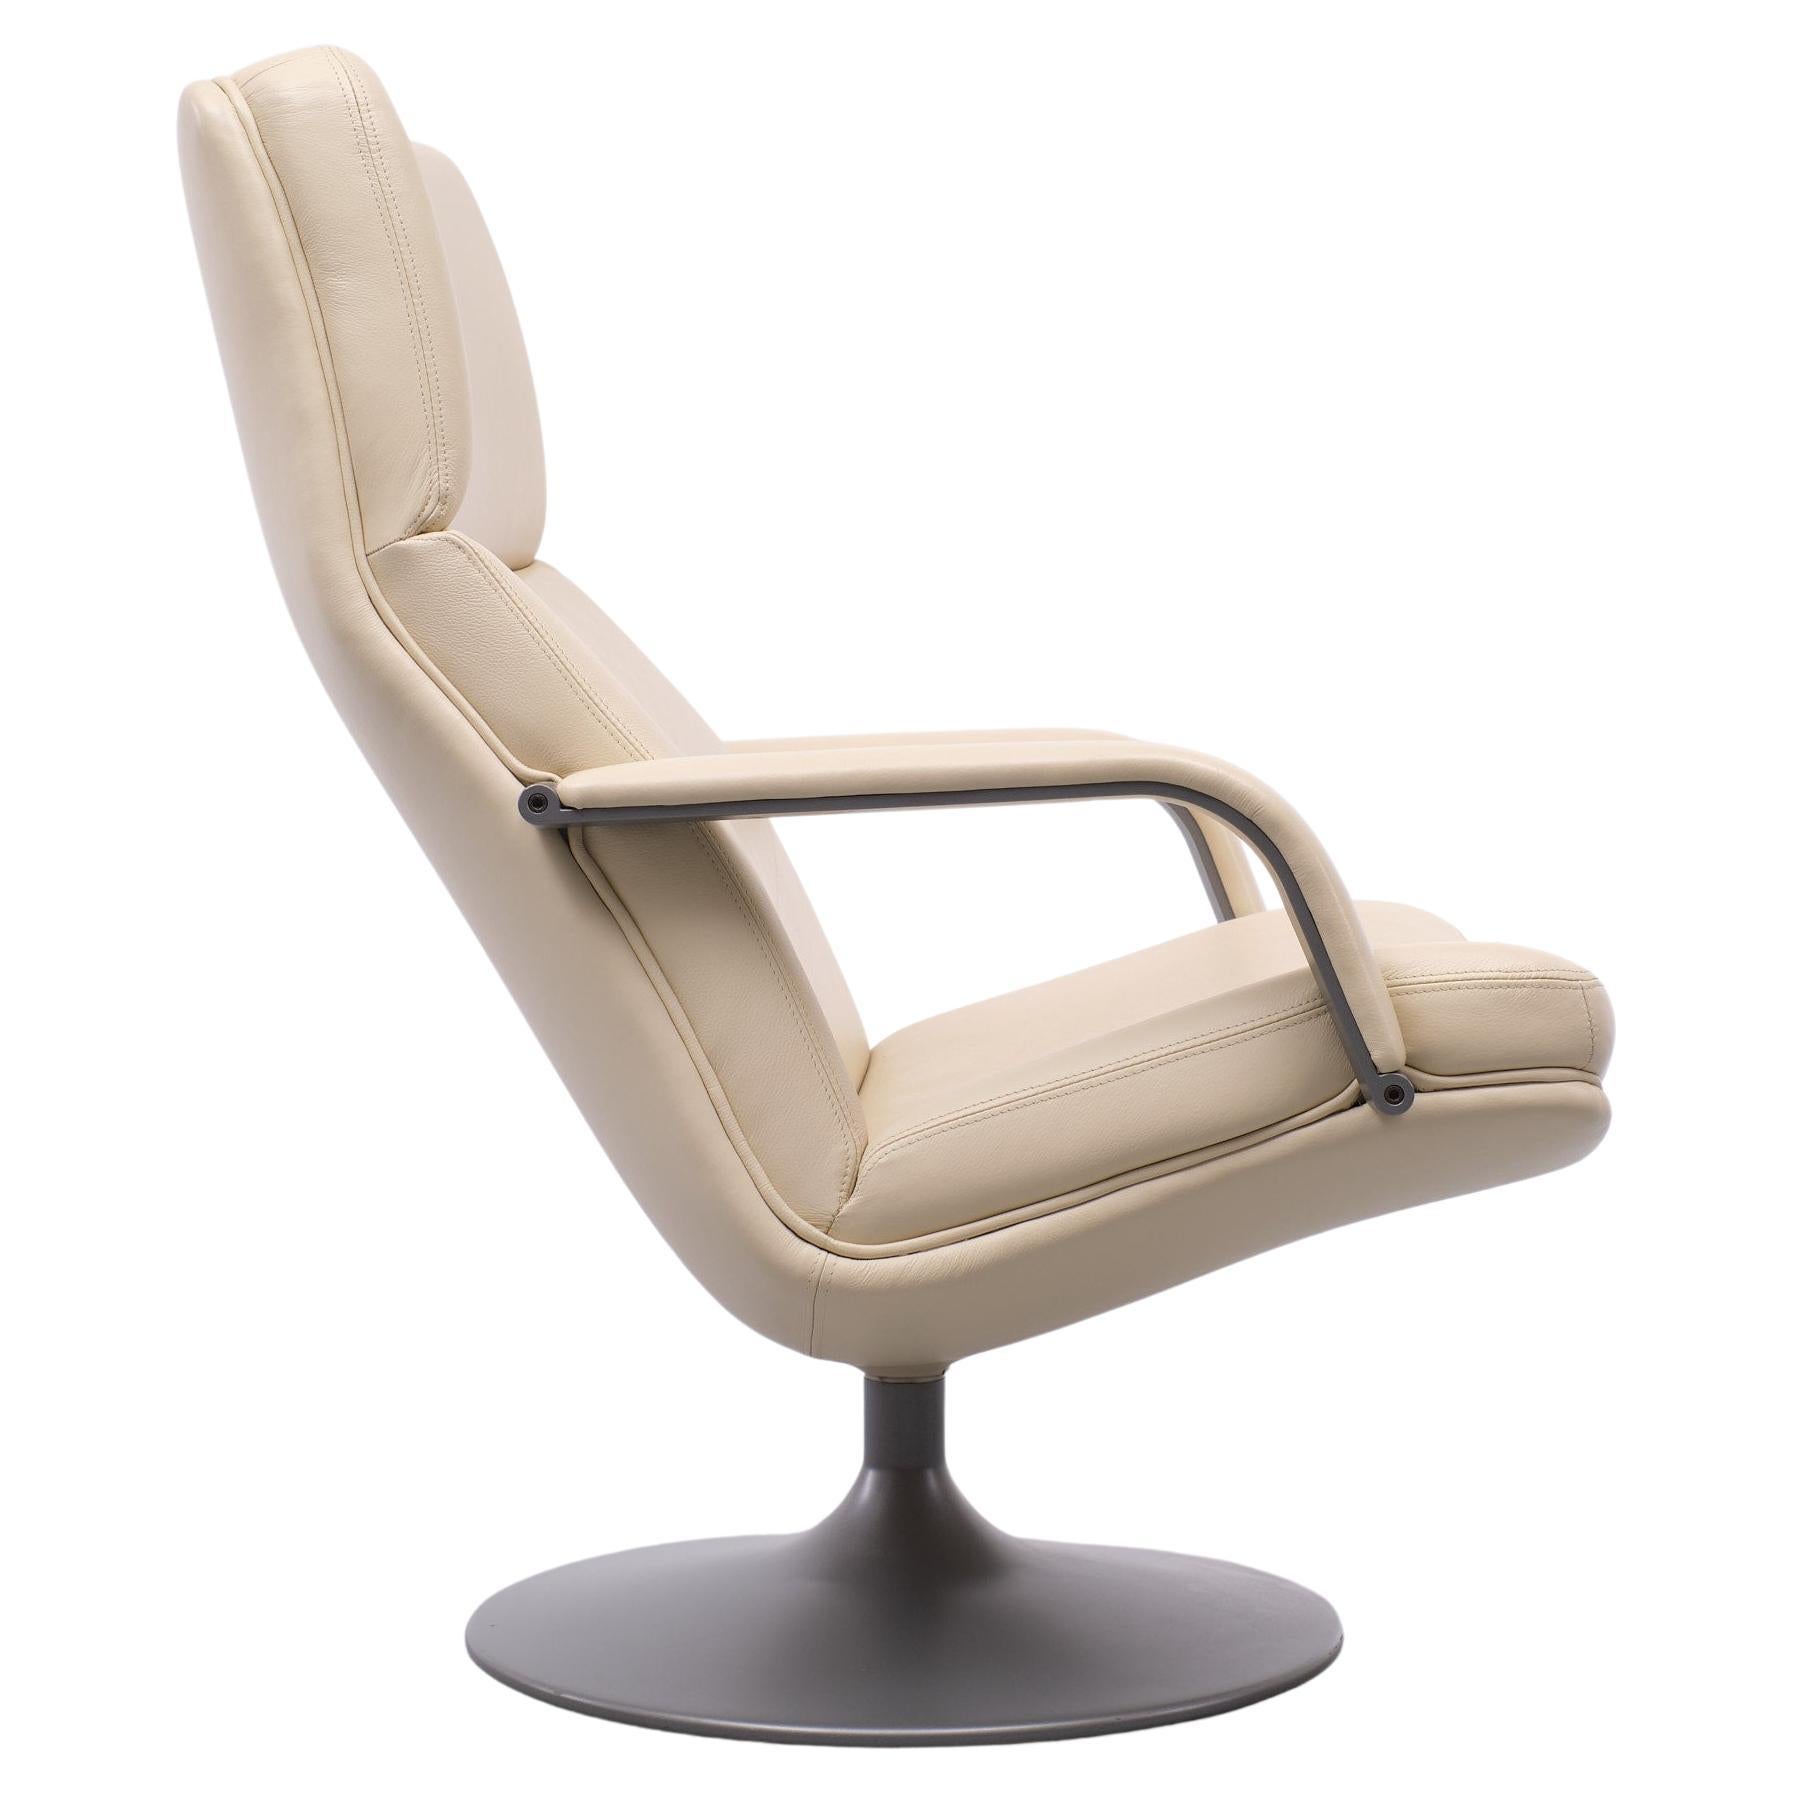 Beautiful lounge chair. Design by Geoffrey Harcourt for Artifort 1960s model F182 
Elegant and good design. Very good condition. Creme color leather upholstery. On a Grey Metal base. Turn able. Good seating comfort.